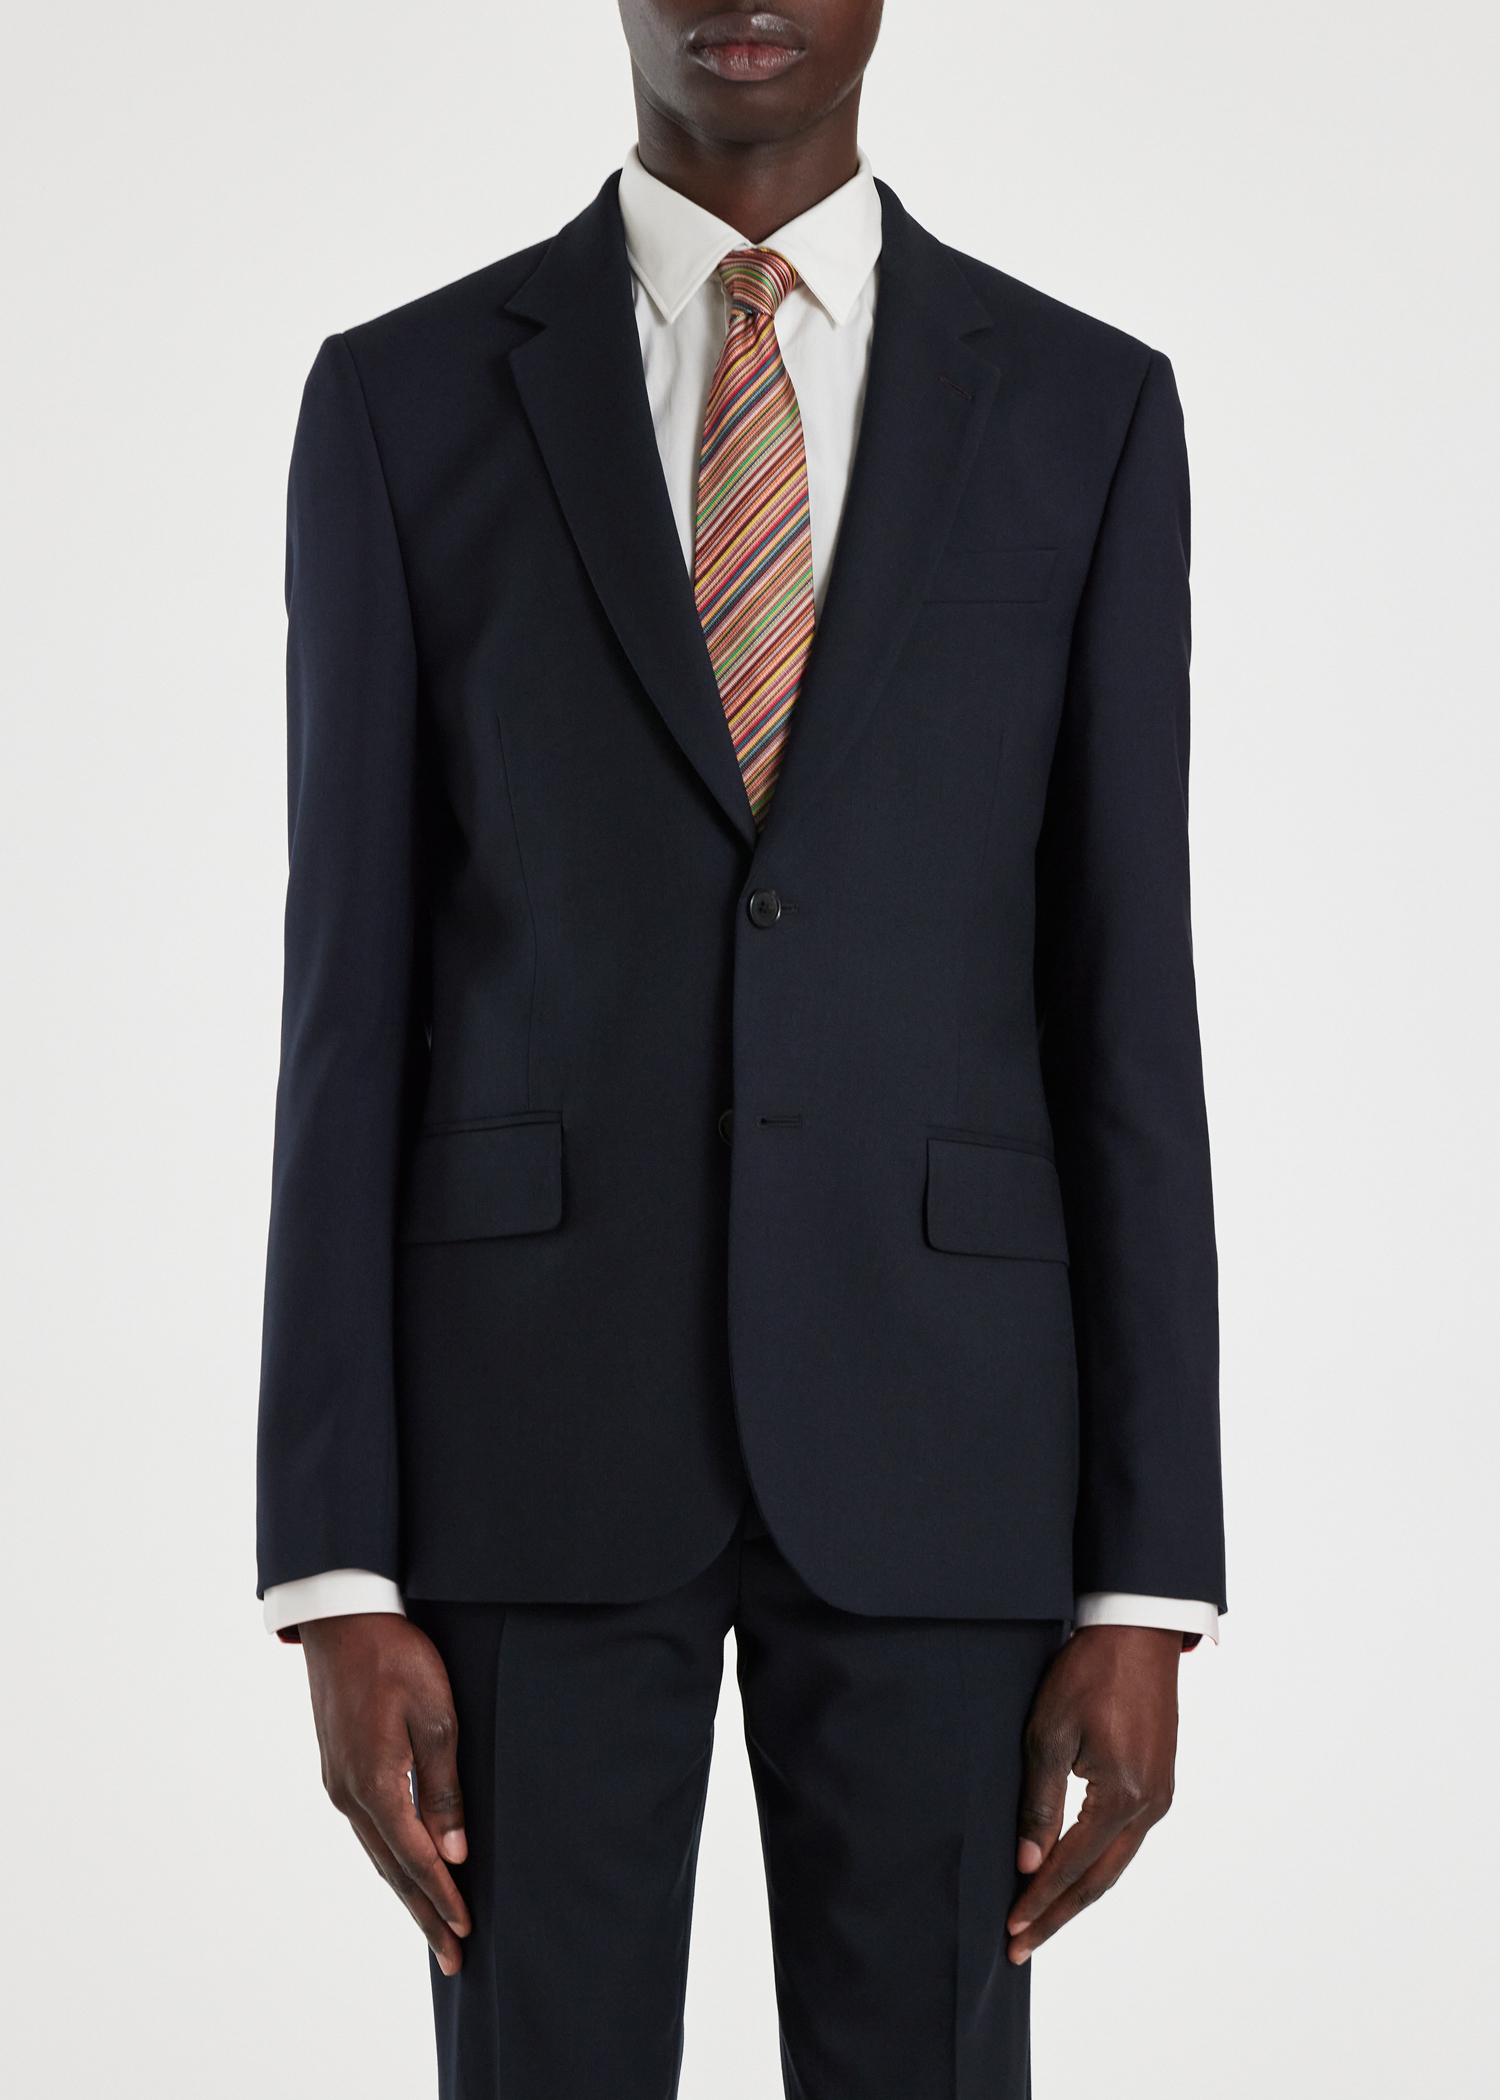 The Soho Suit for Men | Paul Smith